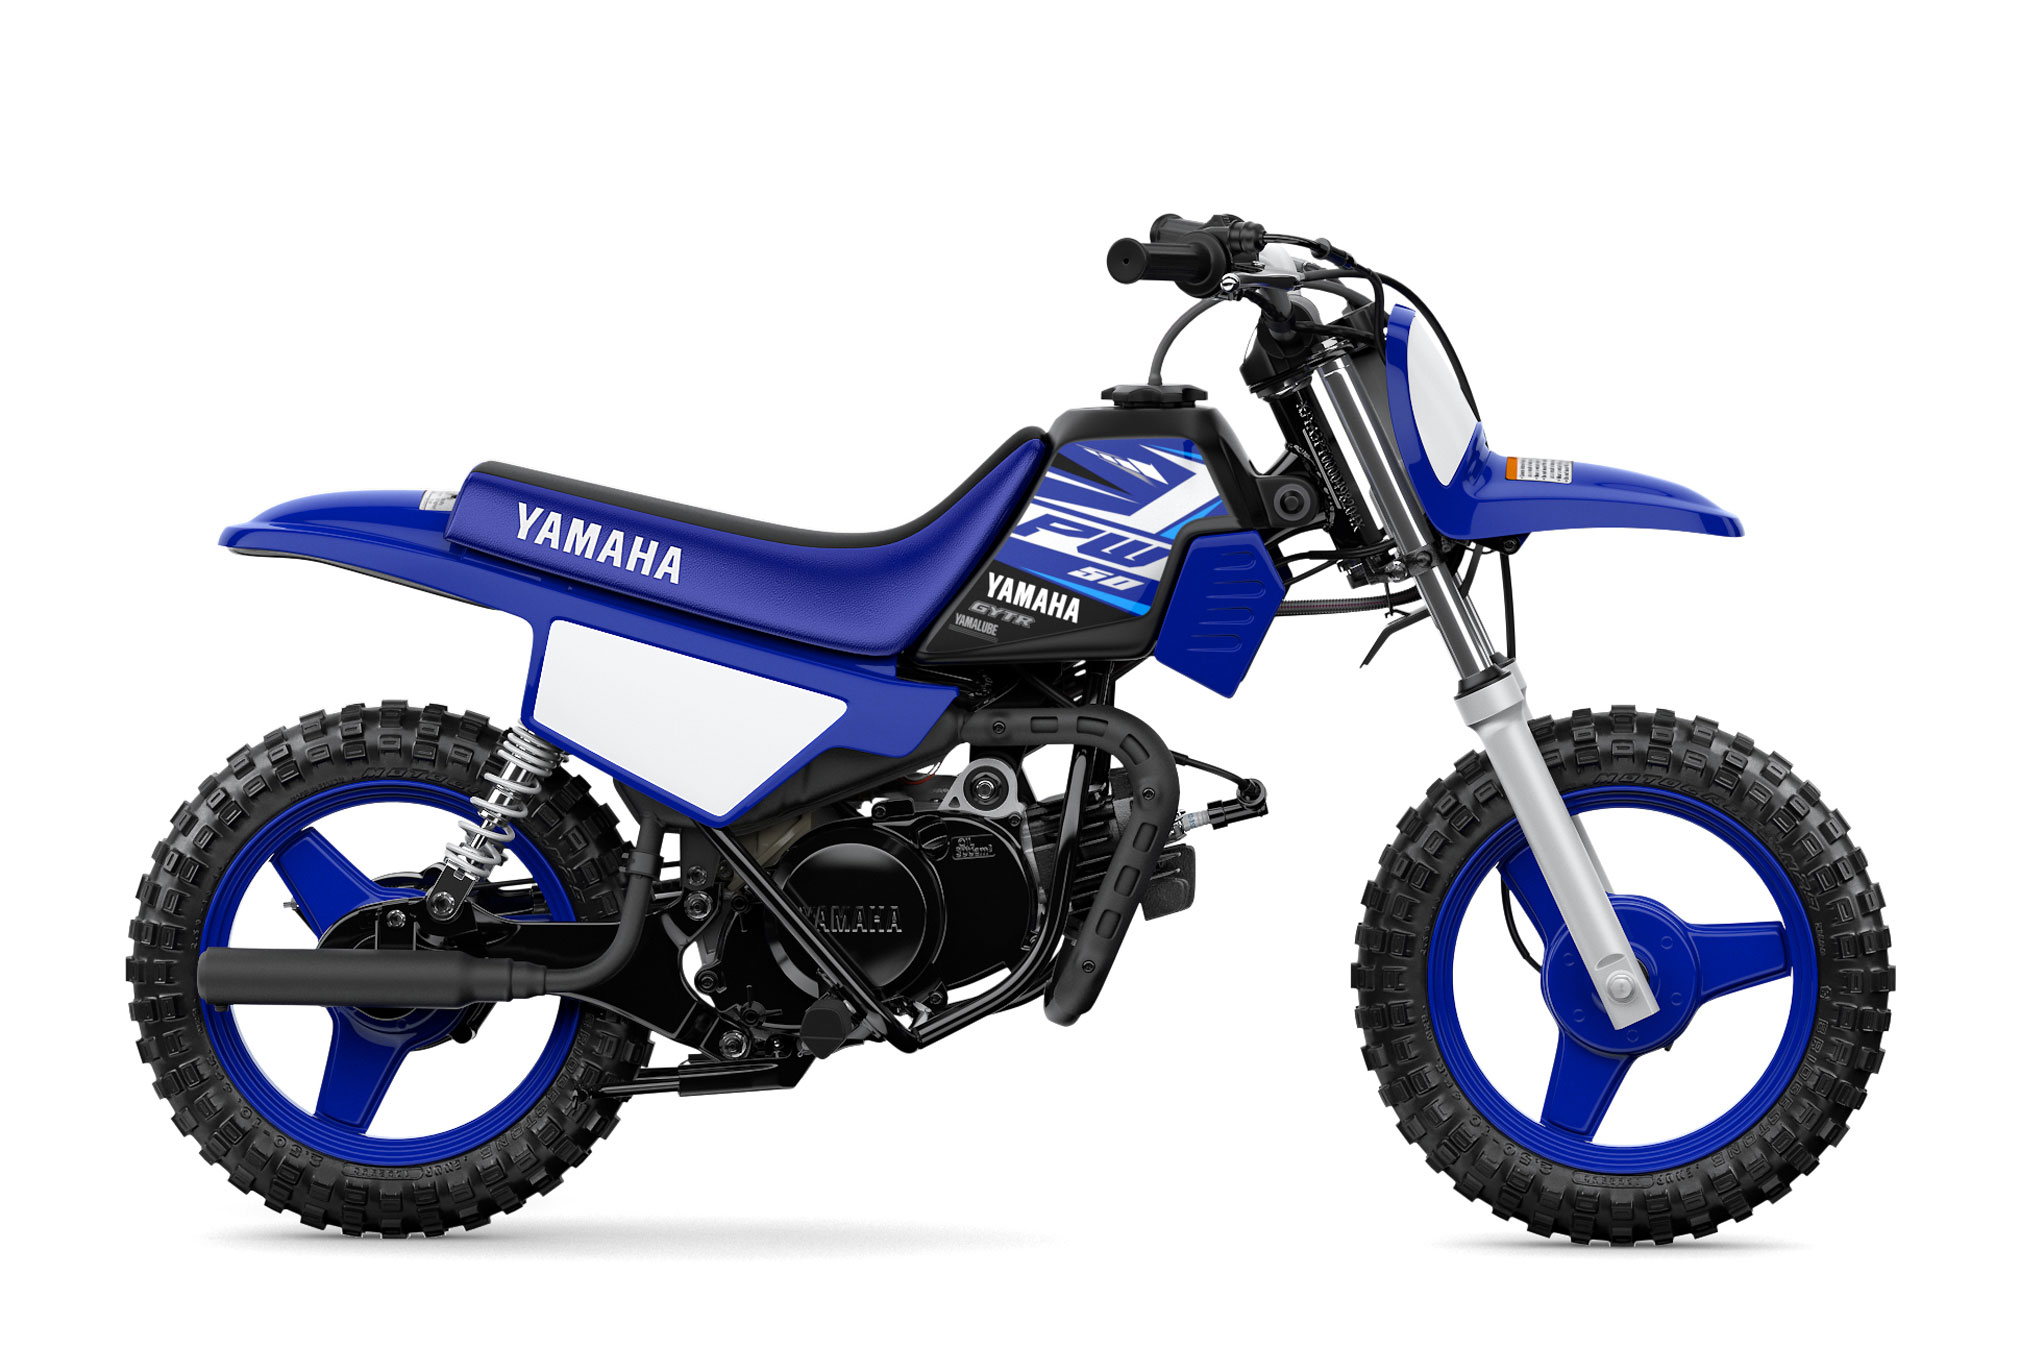 2020 Yamaha PW50 Guide • Total Motorcycle